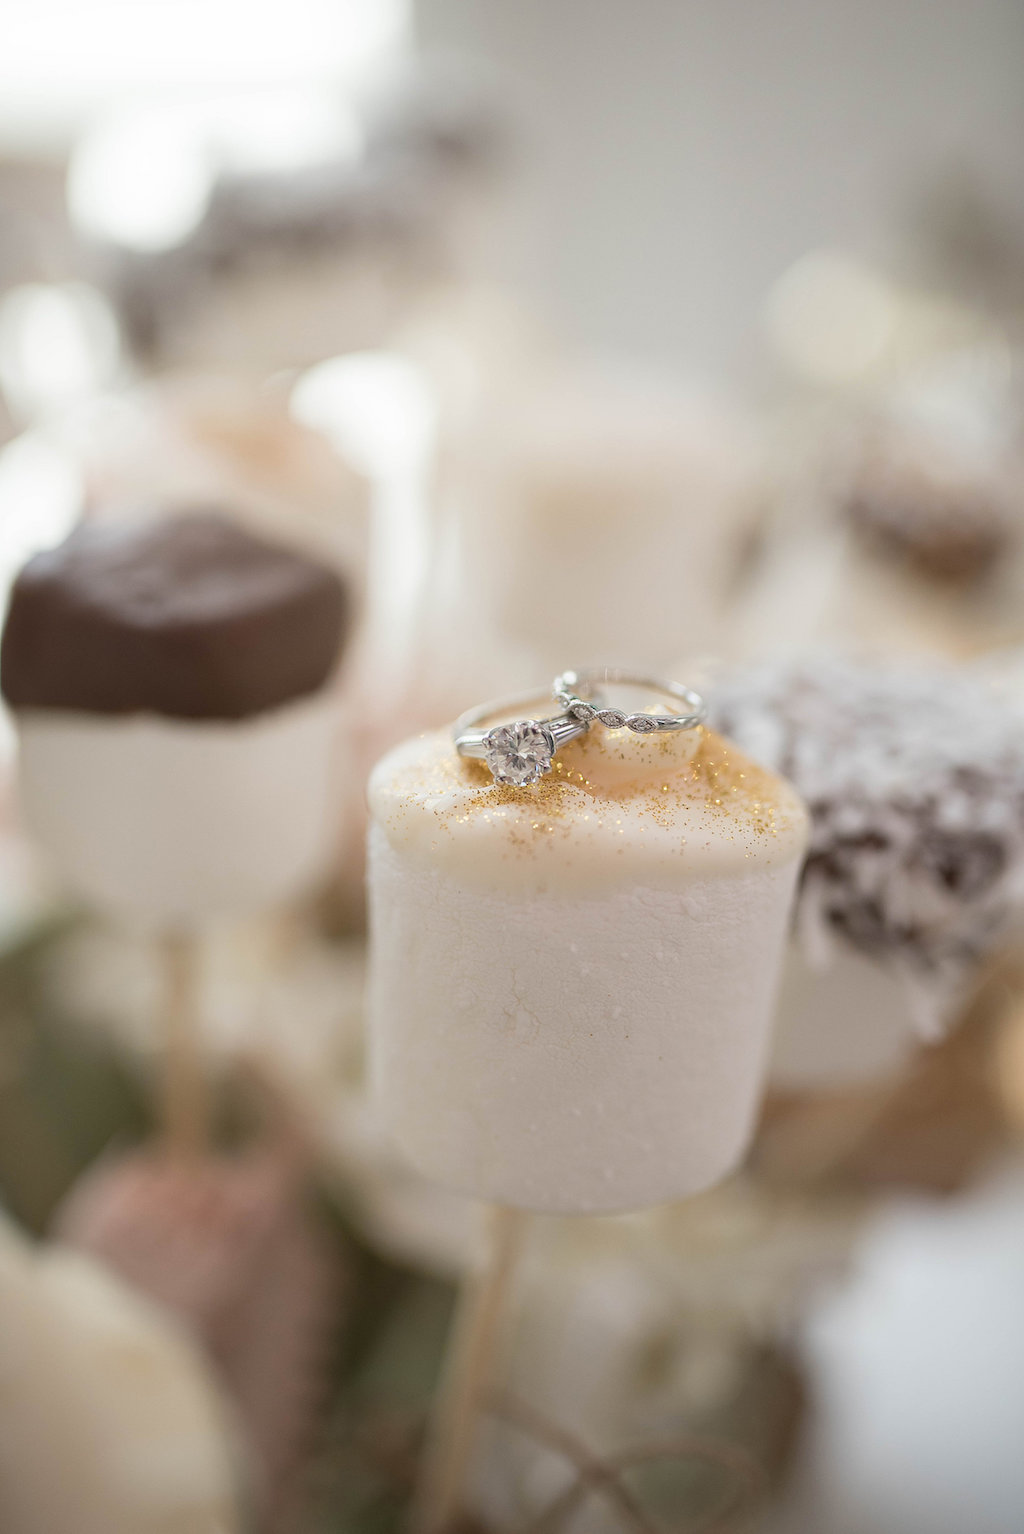 Wedding Reception Dessert Marshmallows with Engagement and Wedding Rings | Tampa Bay Photographer Kristen Marie Photography